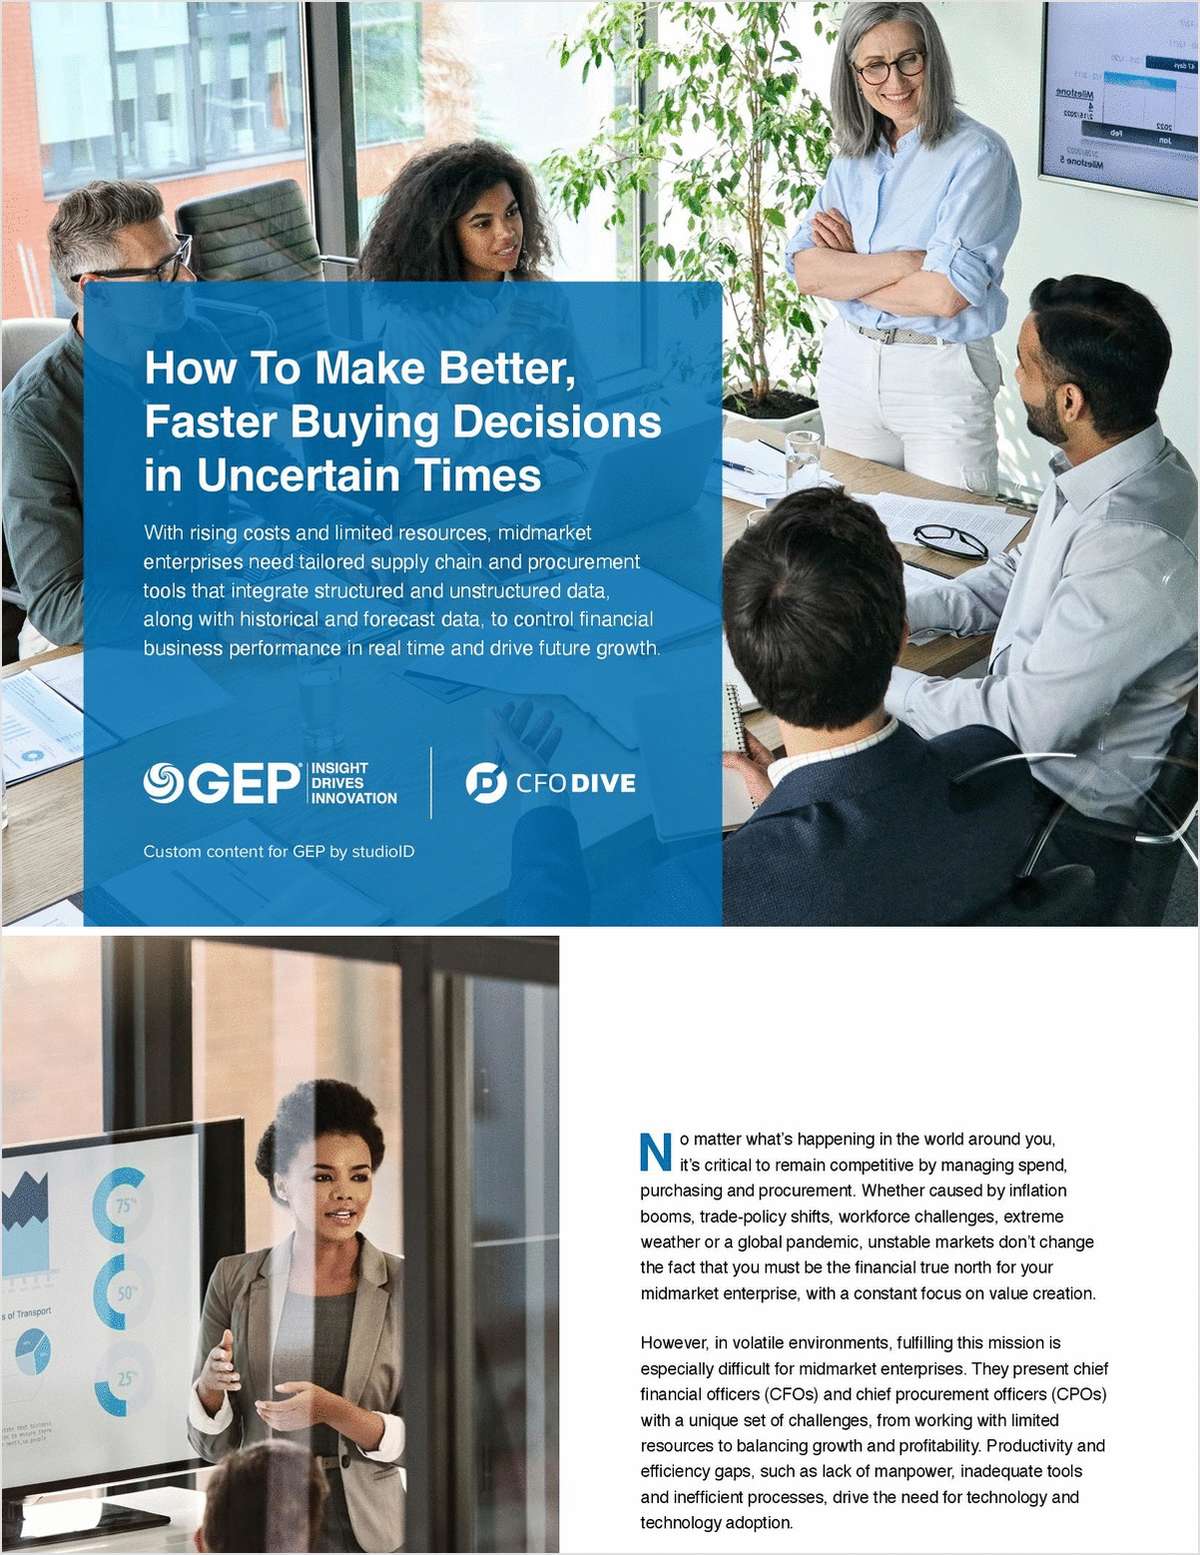 Make Better, Faster Buying Decisions in Uncertain Times